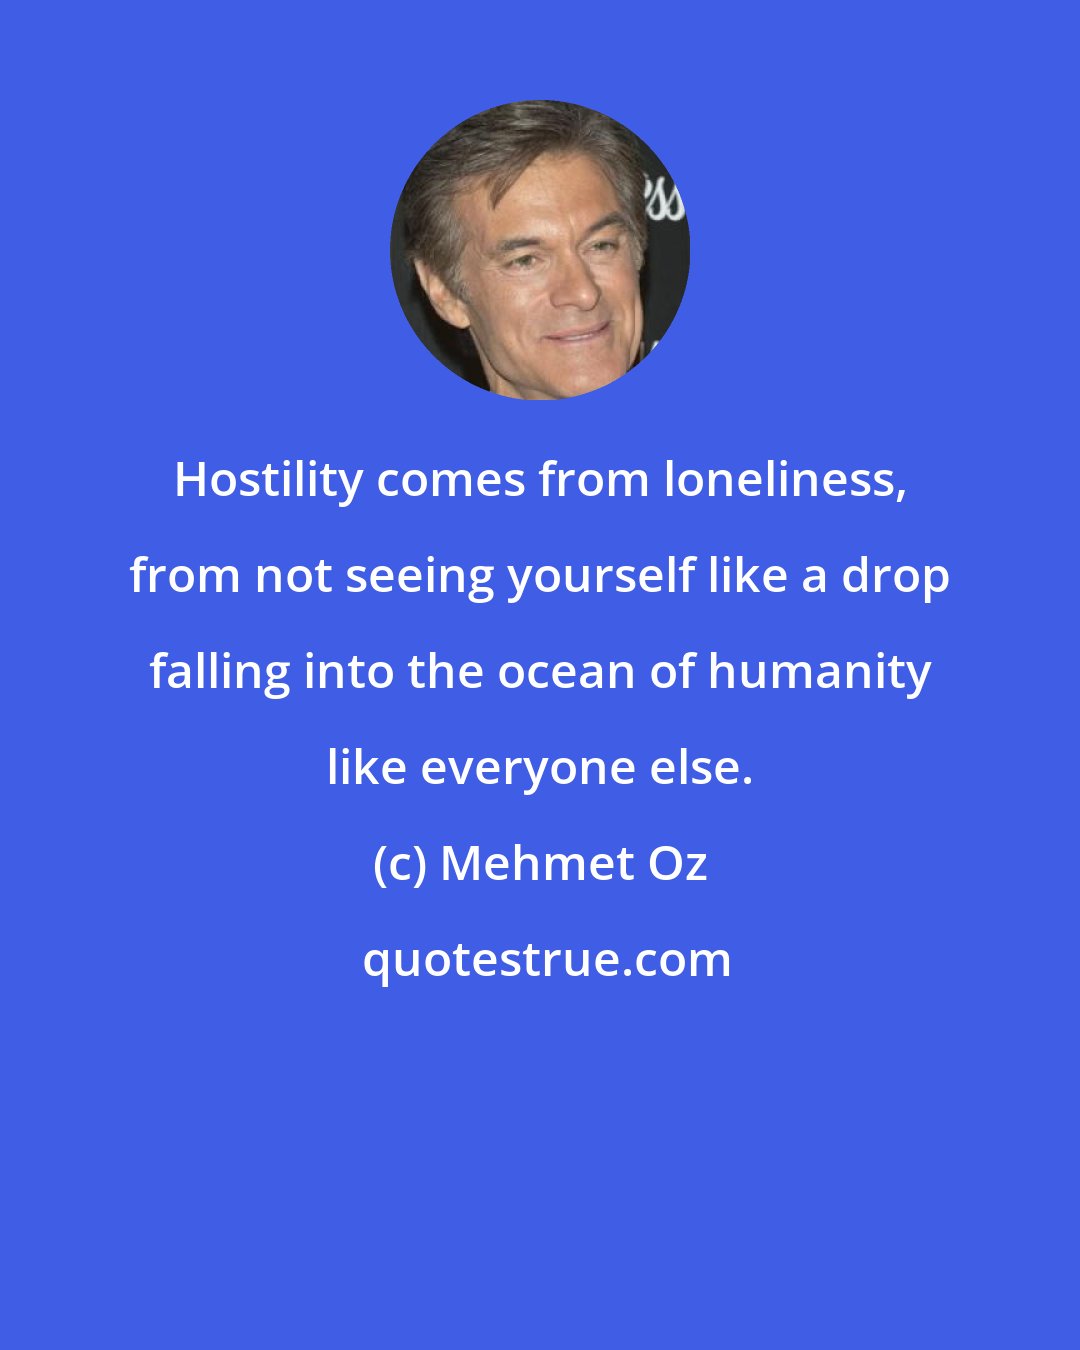 Mehmet Oz: Hostility comes from loneliness, from not seeing yourself like a drop falling into the ocean of humanity like everyone else.